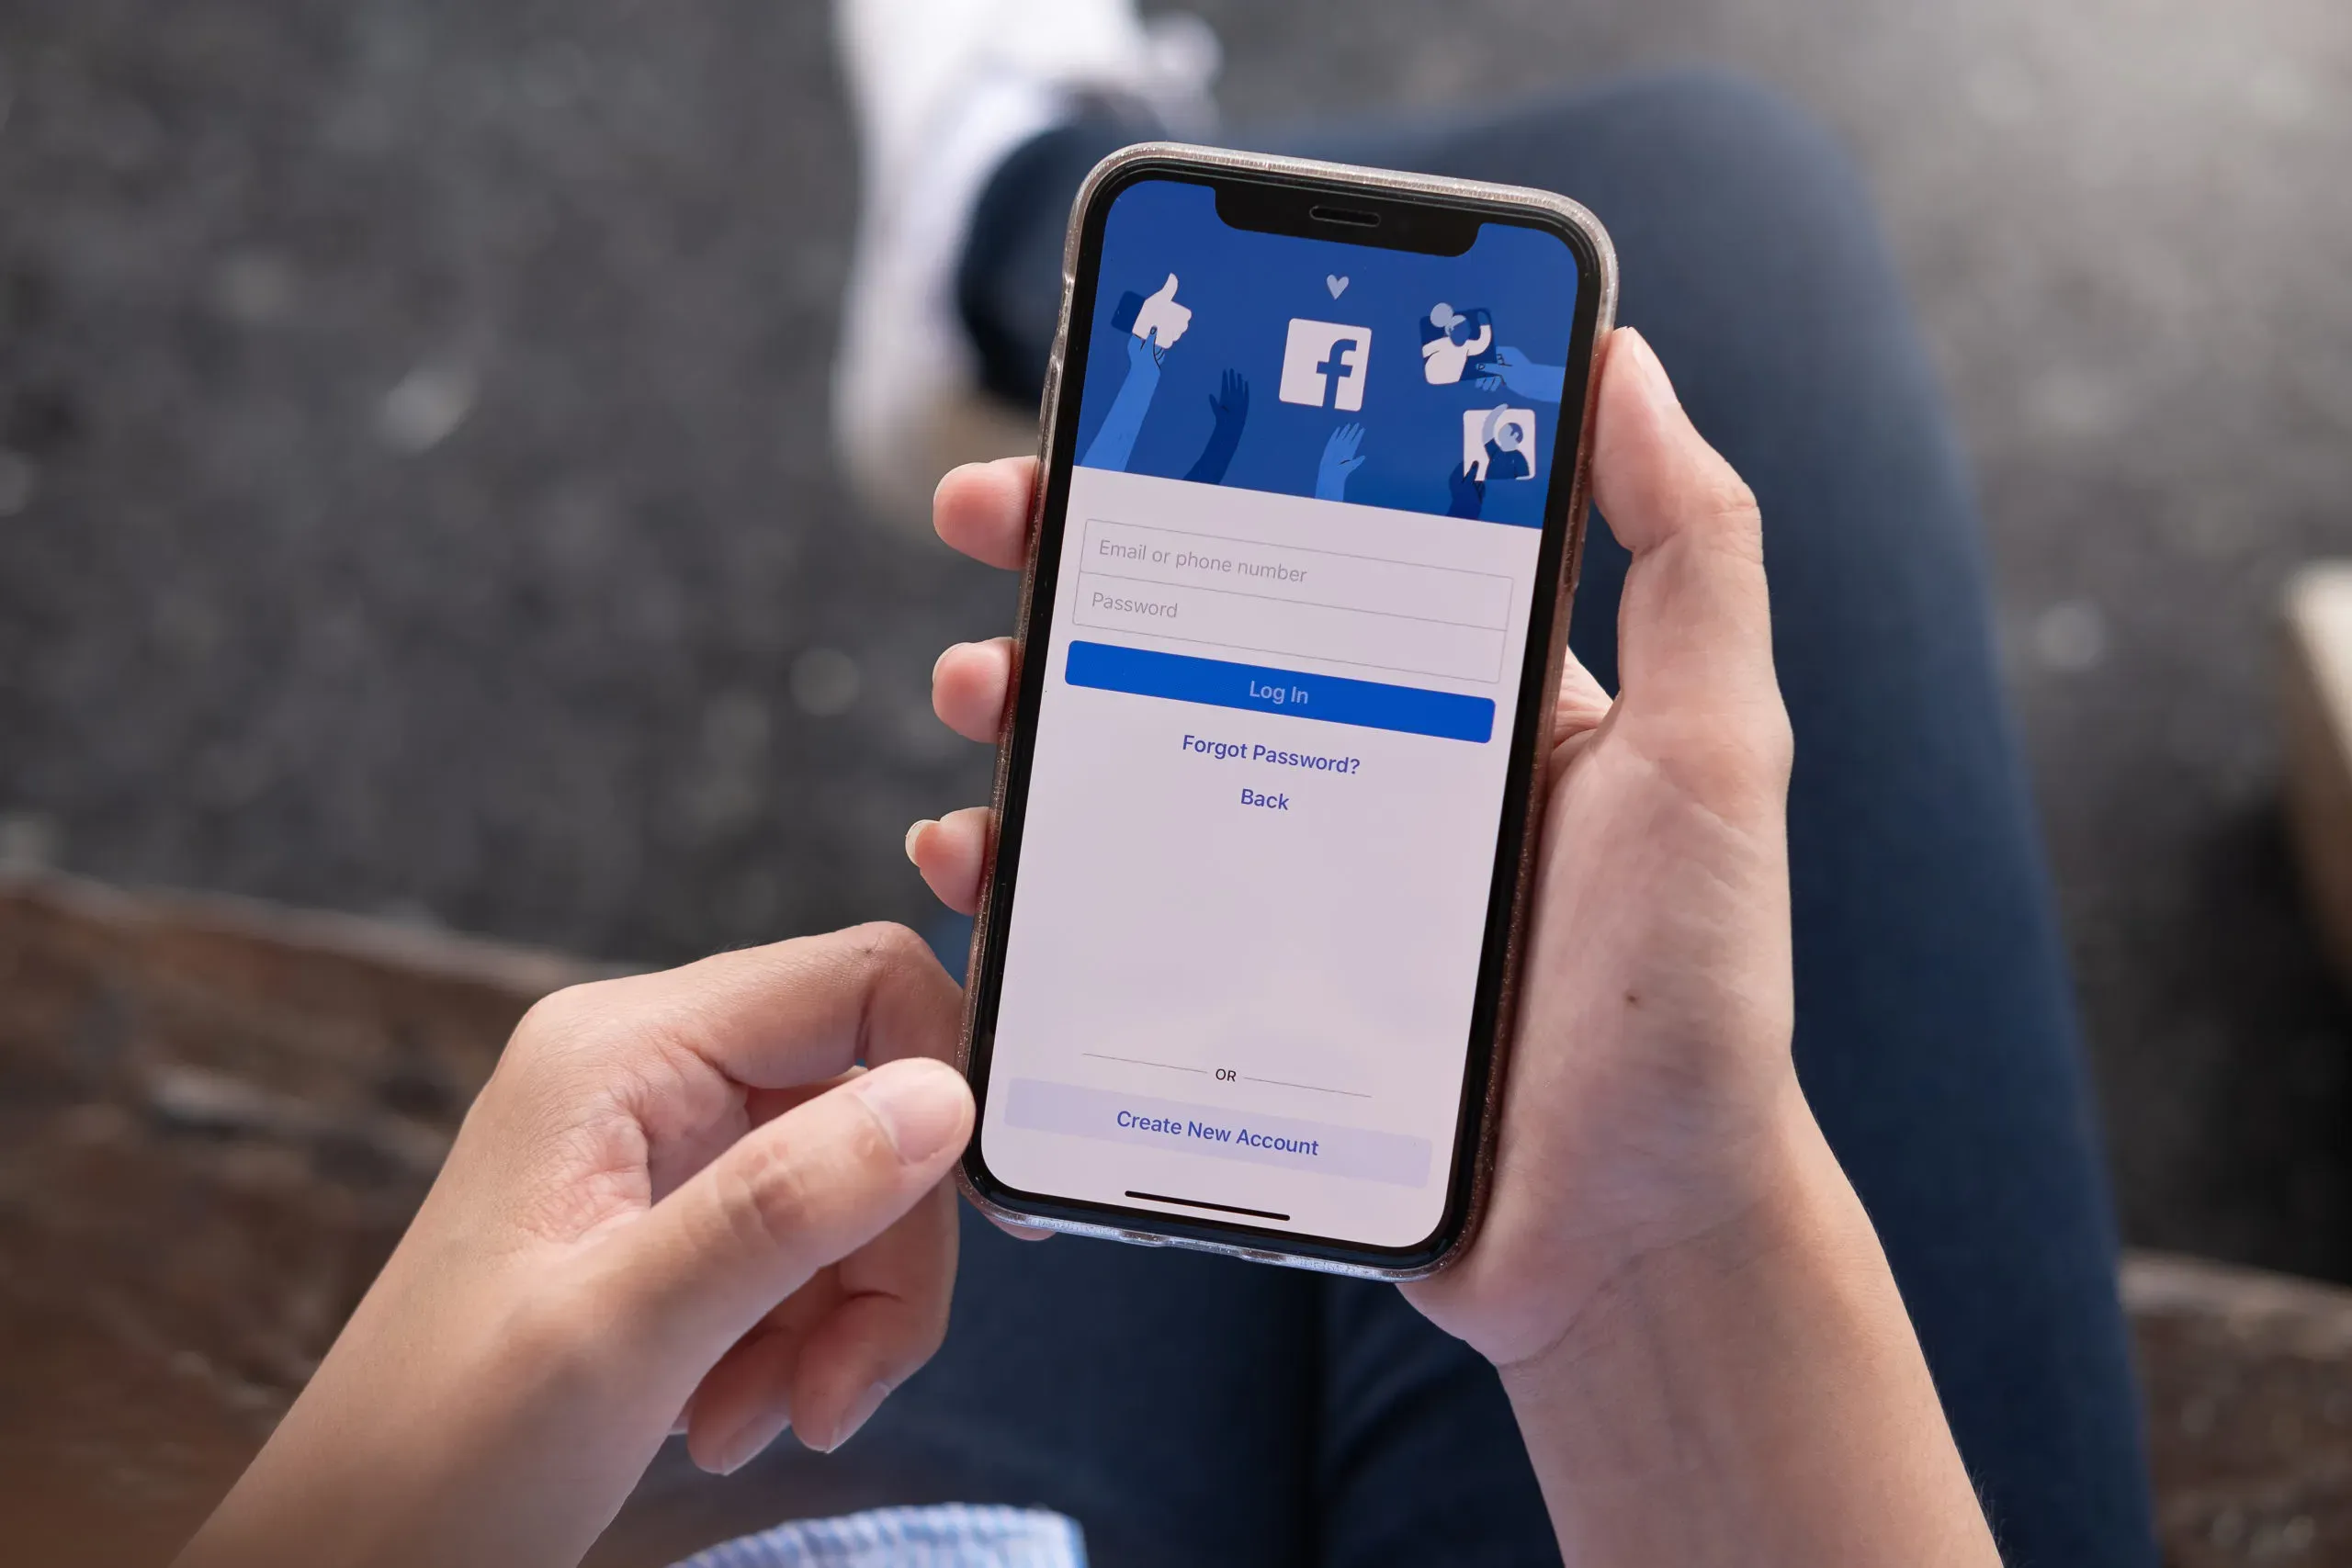 Facebook Launches New Advertising Features To Help SMBs Drive Revenue During the Holiday Season